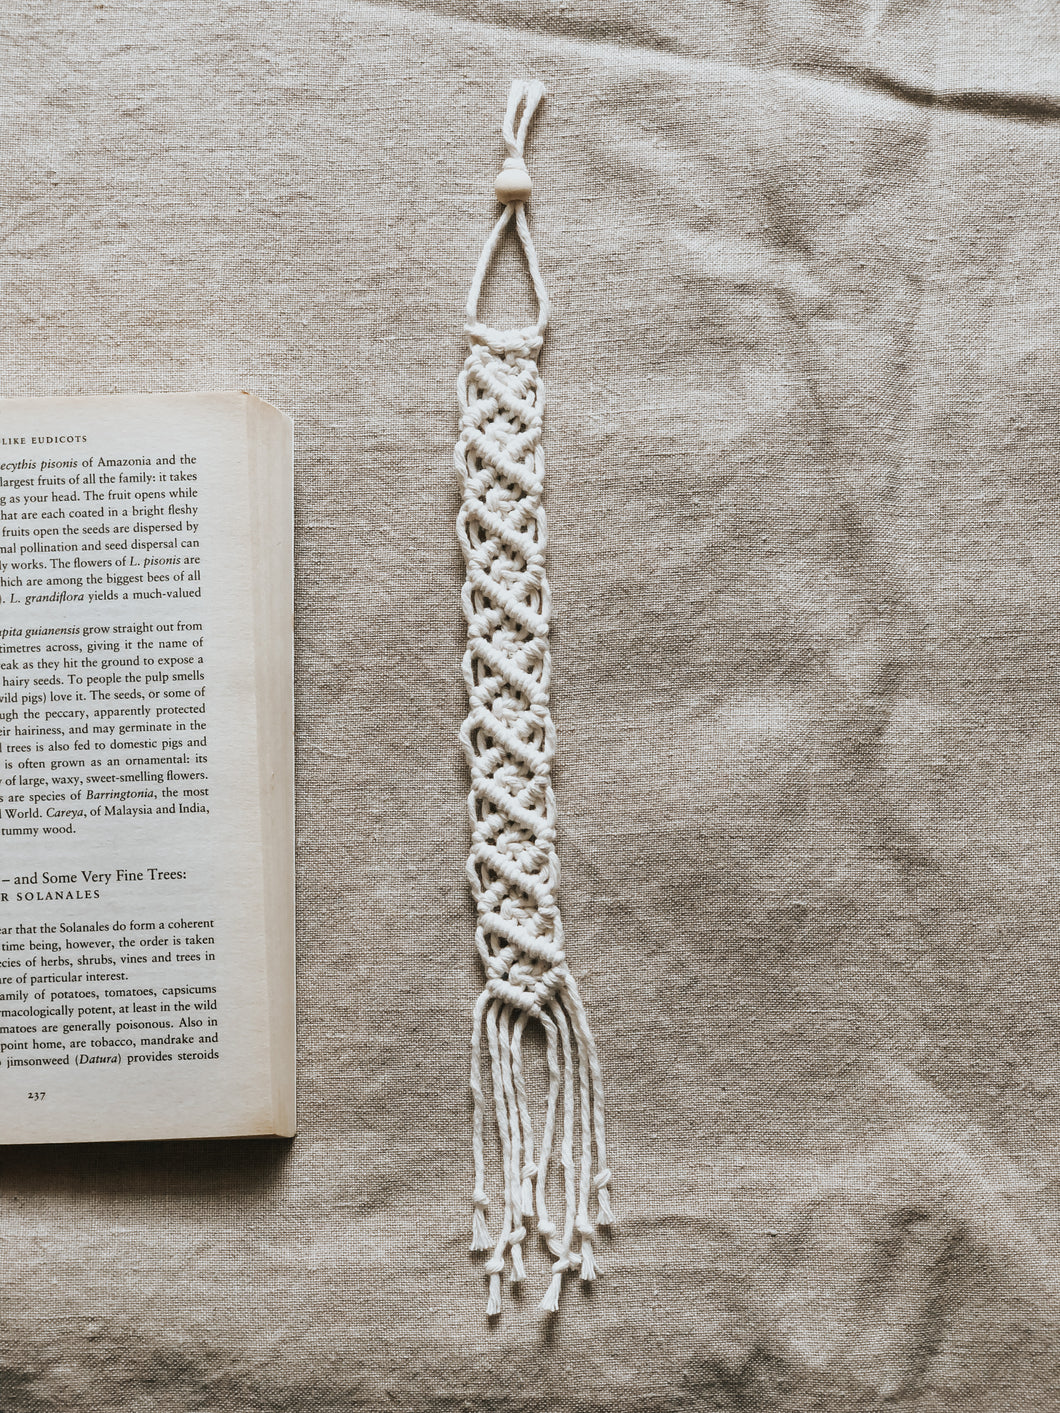 These macrame bookmarks add such a nice touch to the books that you like to read. They are hand-dyed in soft pastel colors making them subtle, elegant and one of a kind.